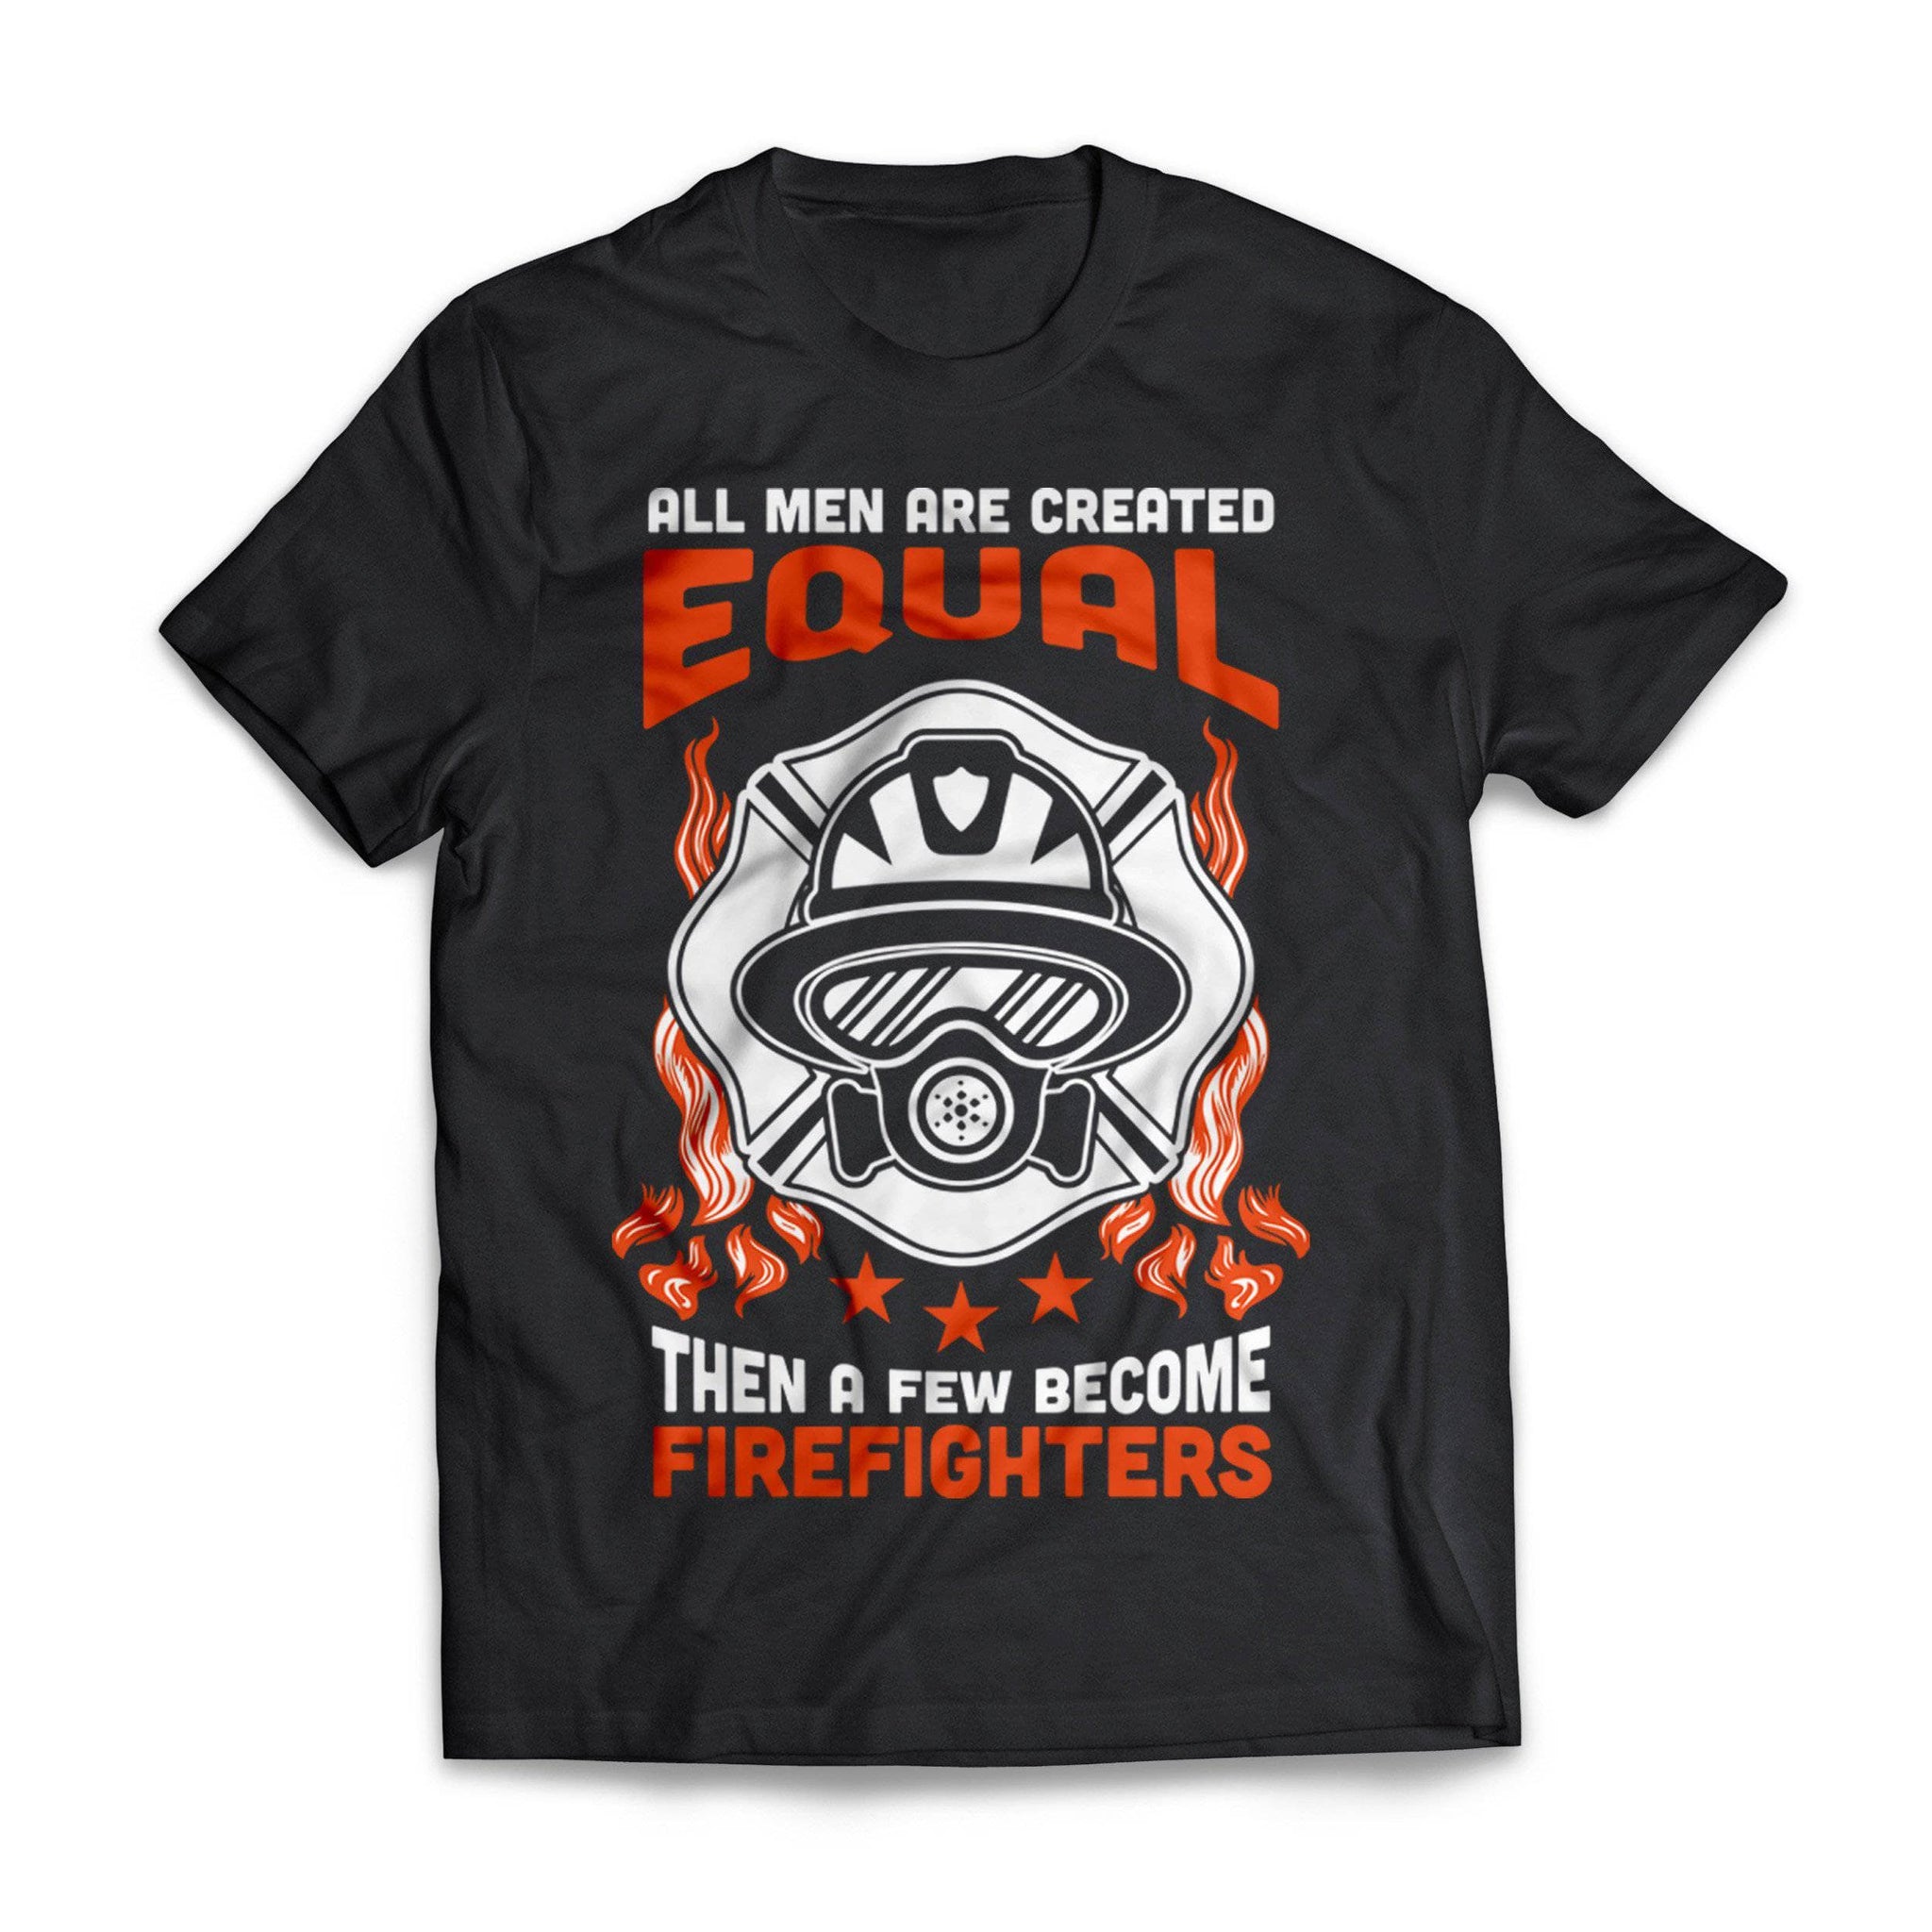 Created Equal Firefighters